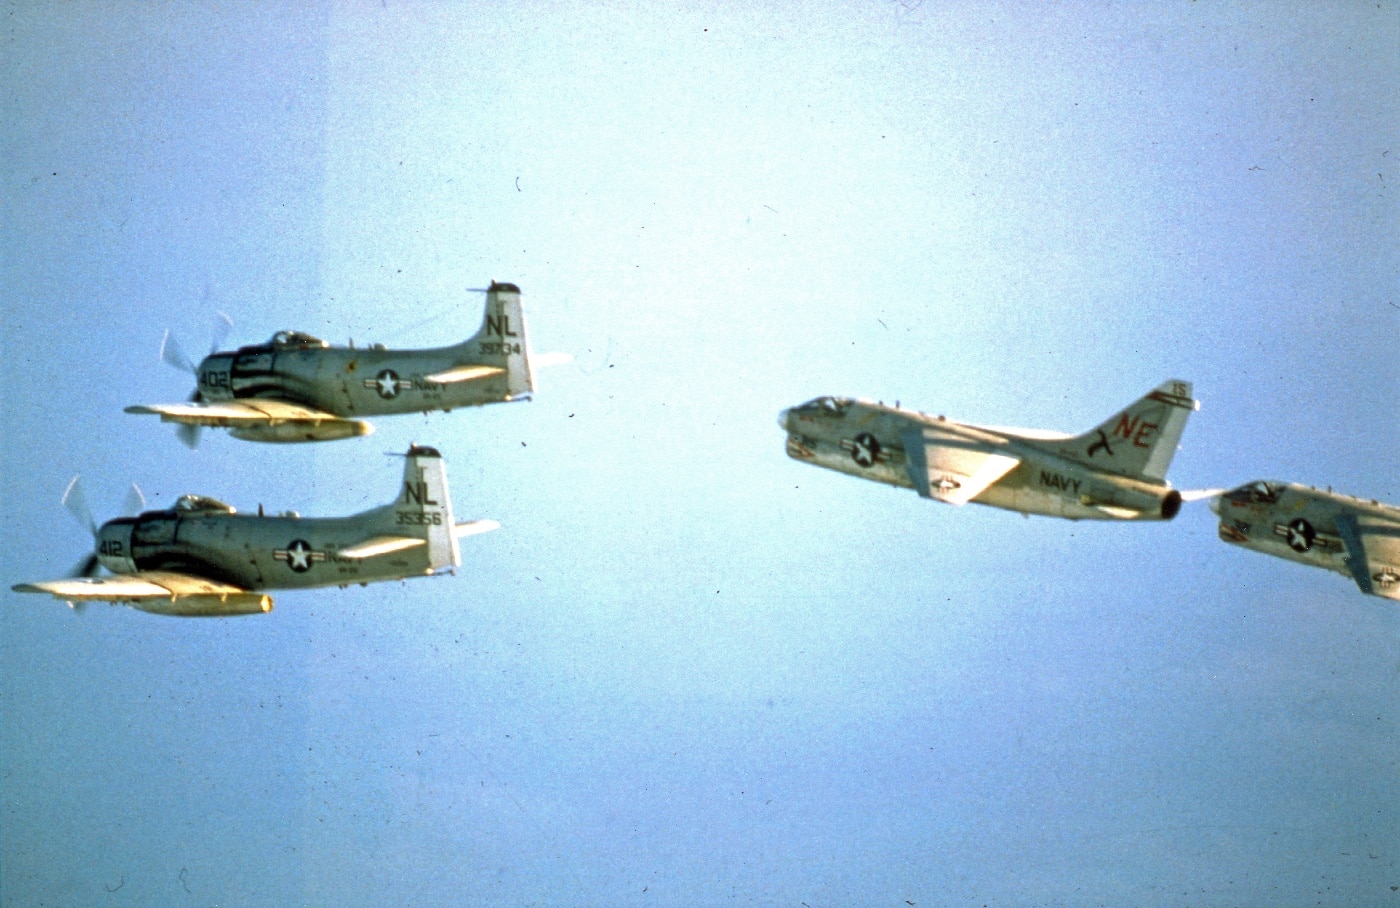 a-1 skyraiders and a-7 corsairs in vietnam war